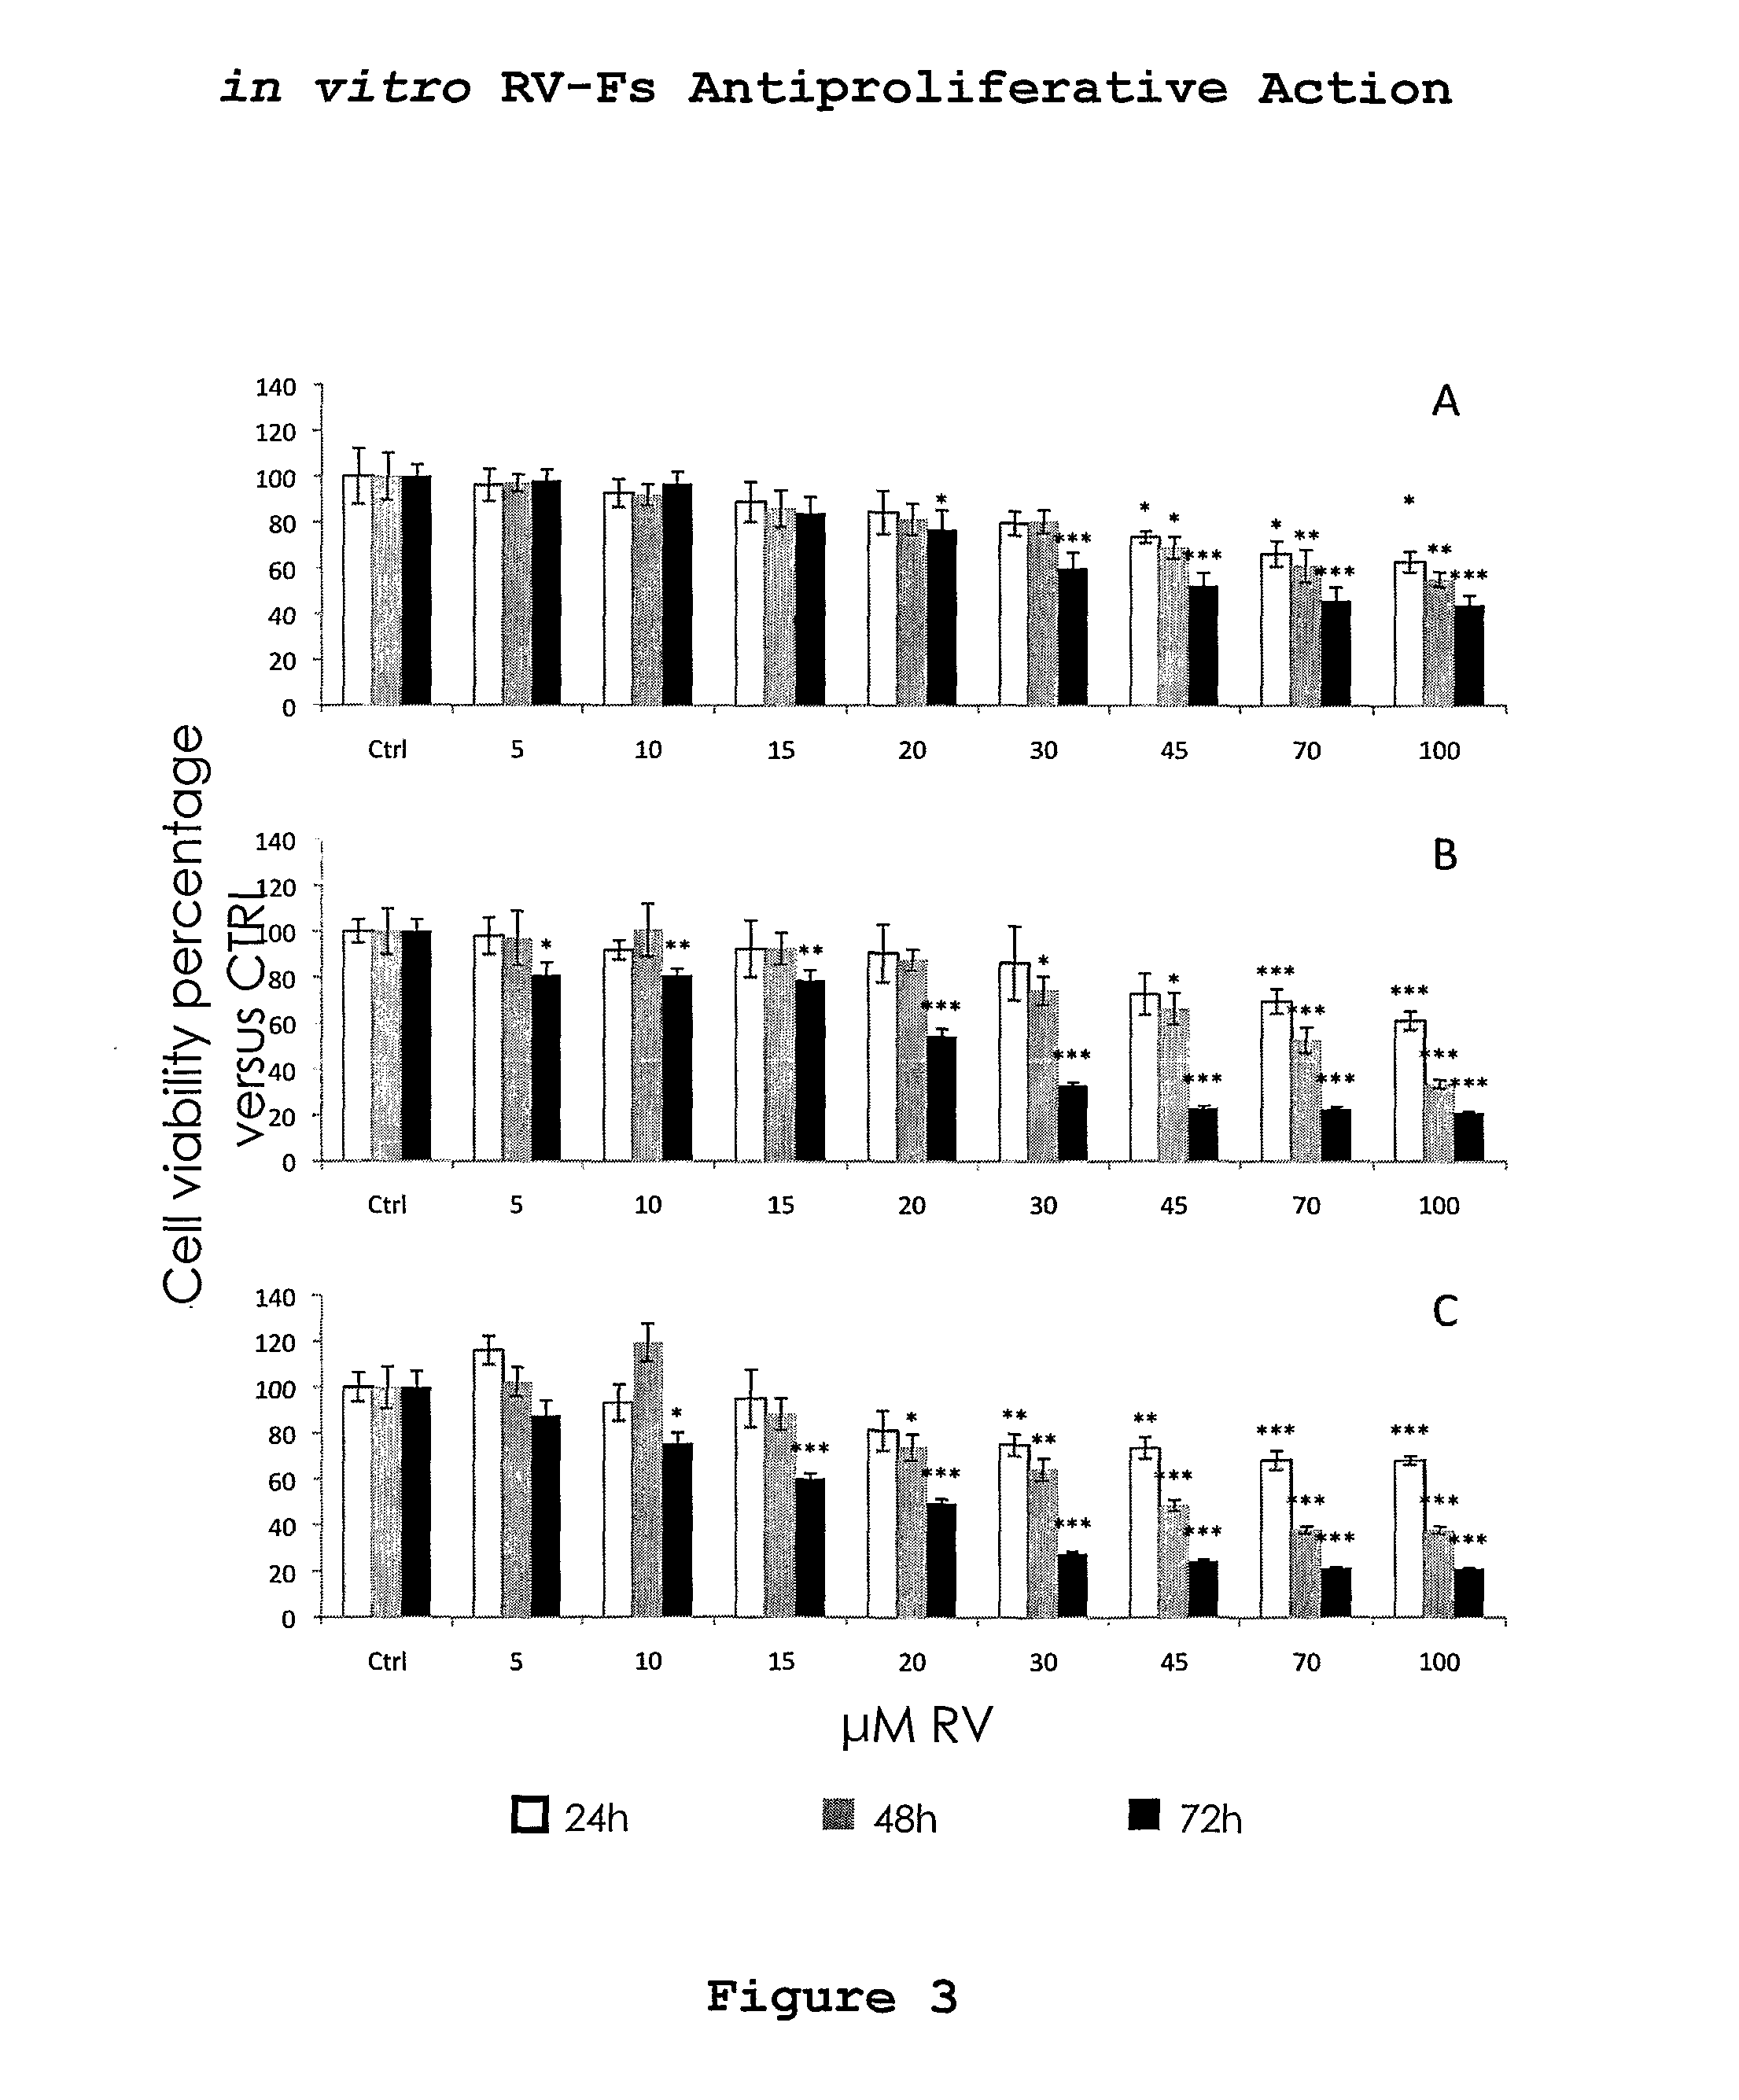 Formulations with Anti-neoplastic activity